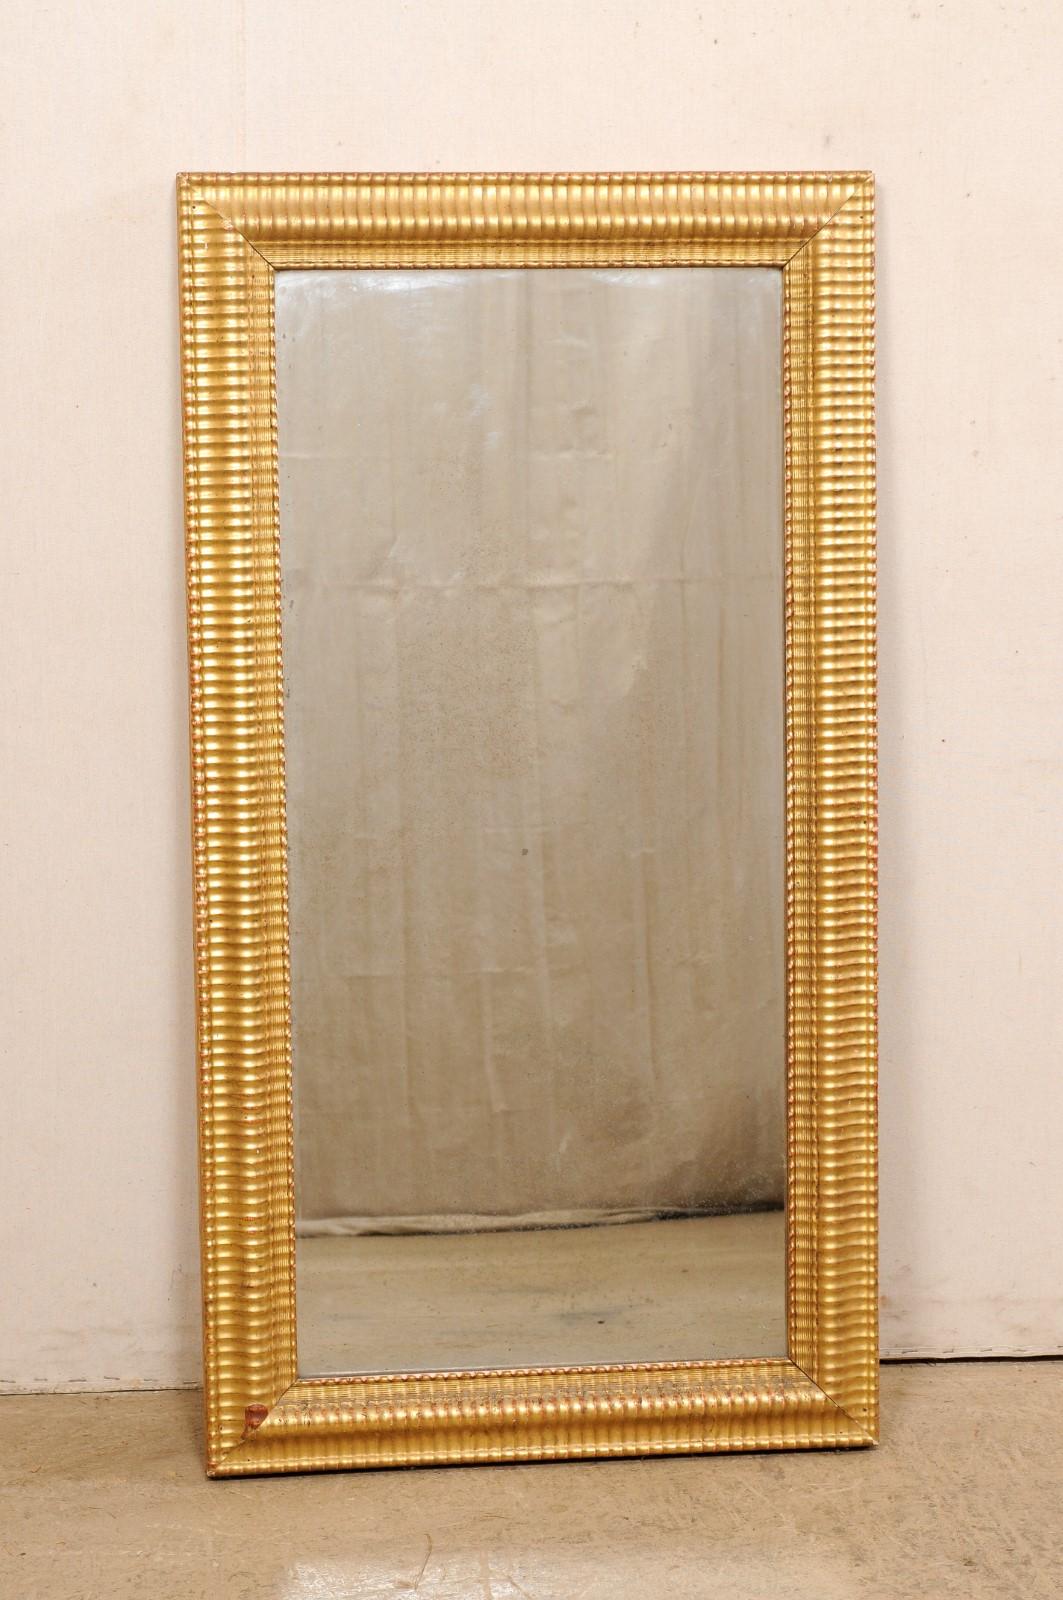 A French carved and gilt rectangular wall mirror from the 19th century. This antique mirror from France has been created in beautiful clean lines with a rectangular frame carved in a repeating ribbed pattern which gives it a subtle movement and